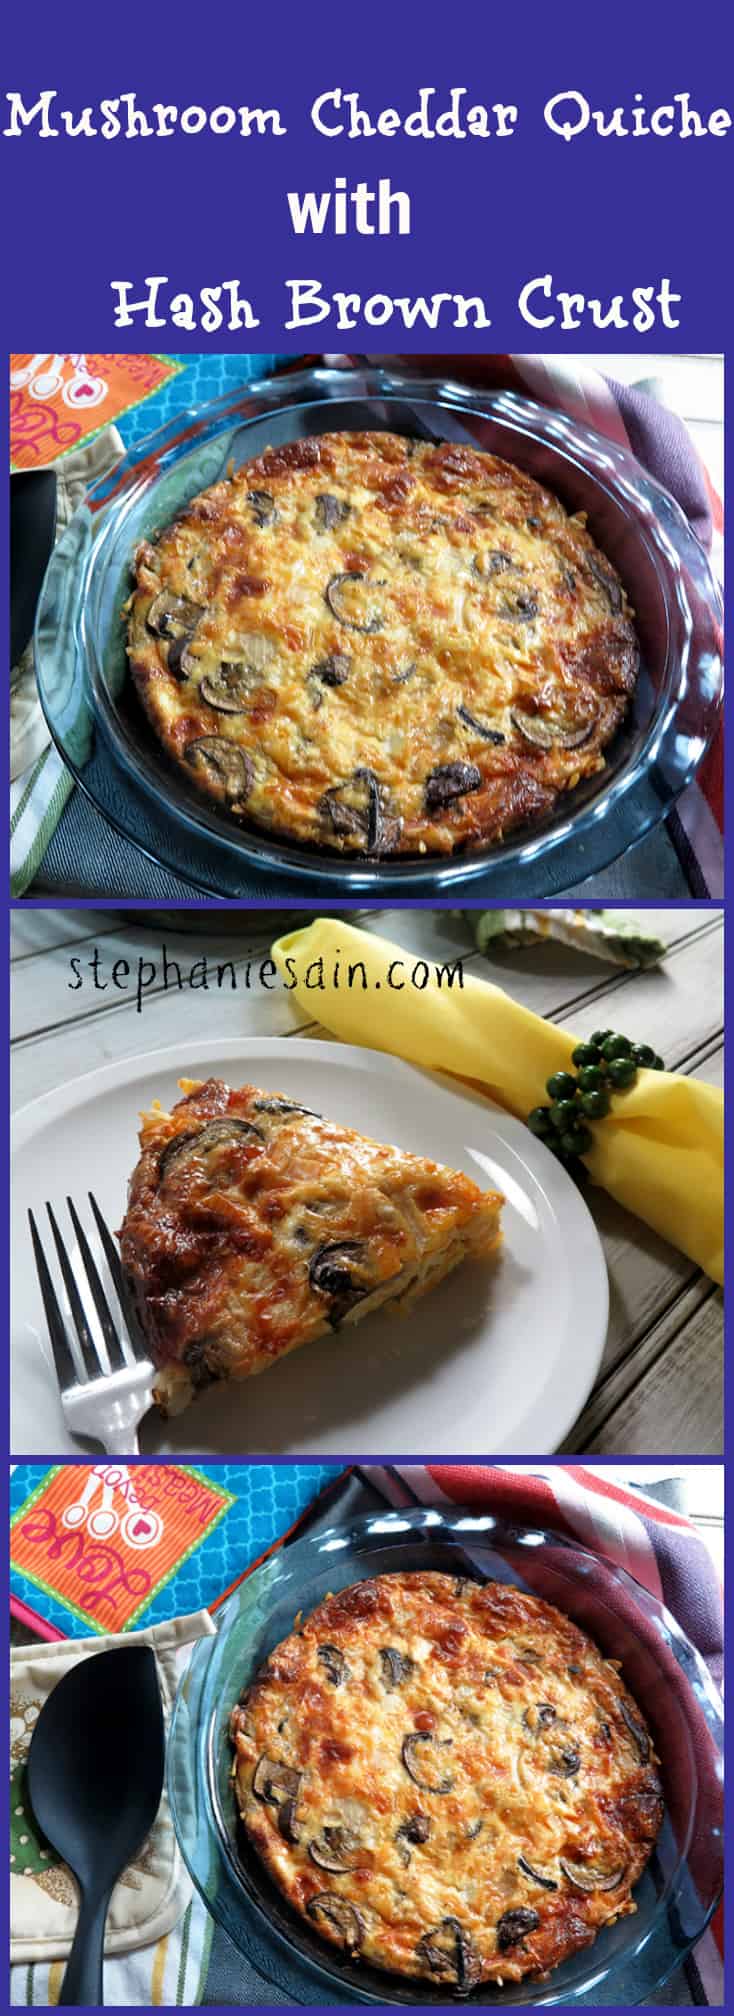 Mushroom Cheddar Quiche with Hash brown Crust is a tasty quiche with a naturally gluten free crust made from potatoes. Perfect addition for brunch or dinner. Vegetarian and Gluten Free.